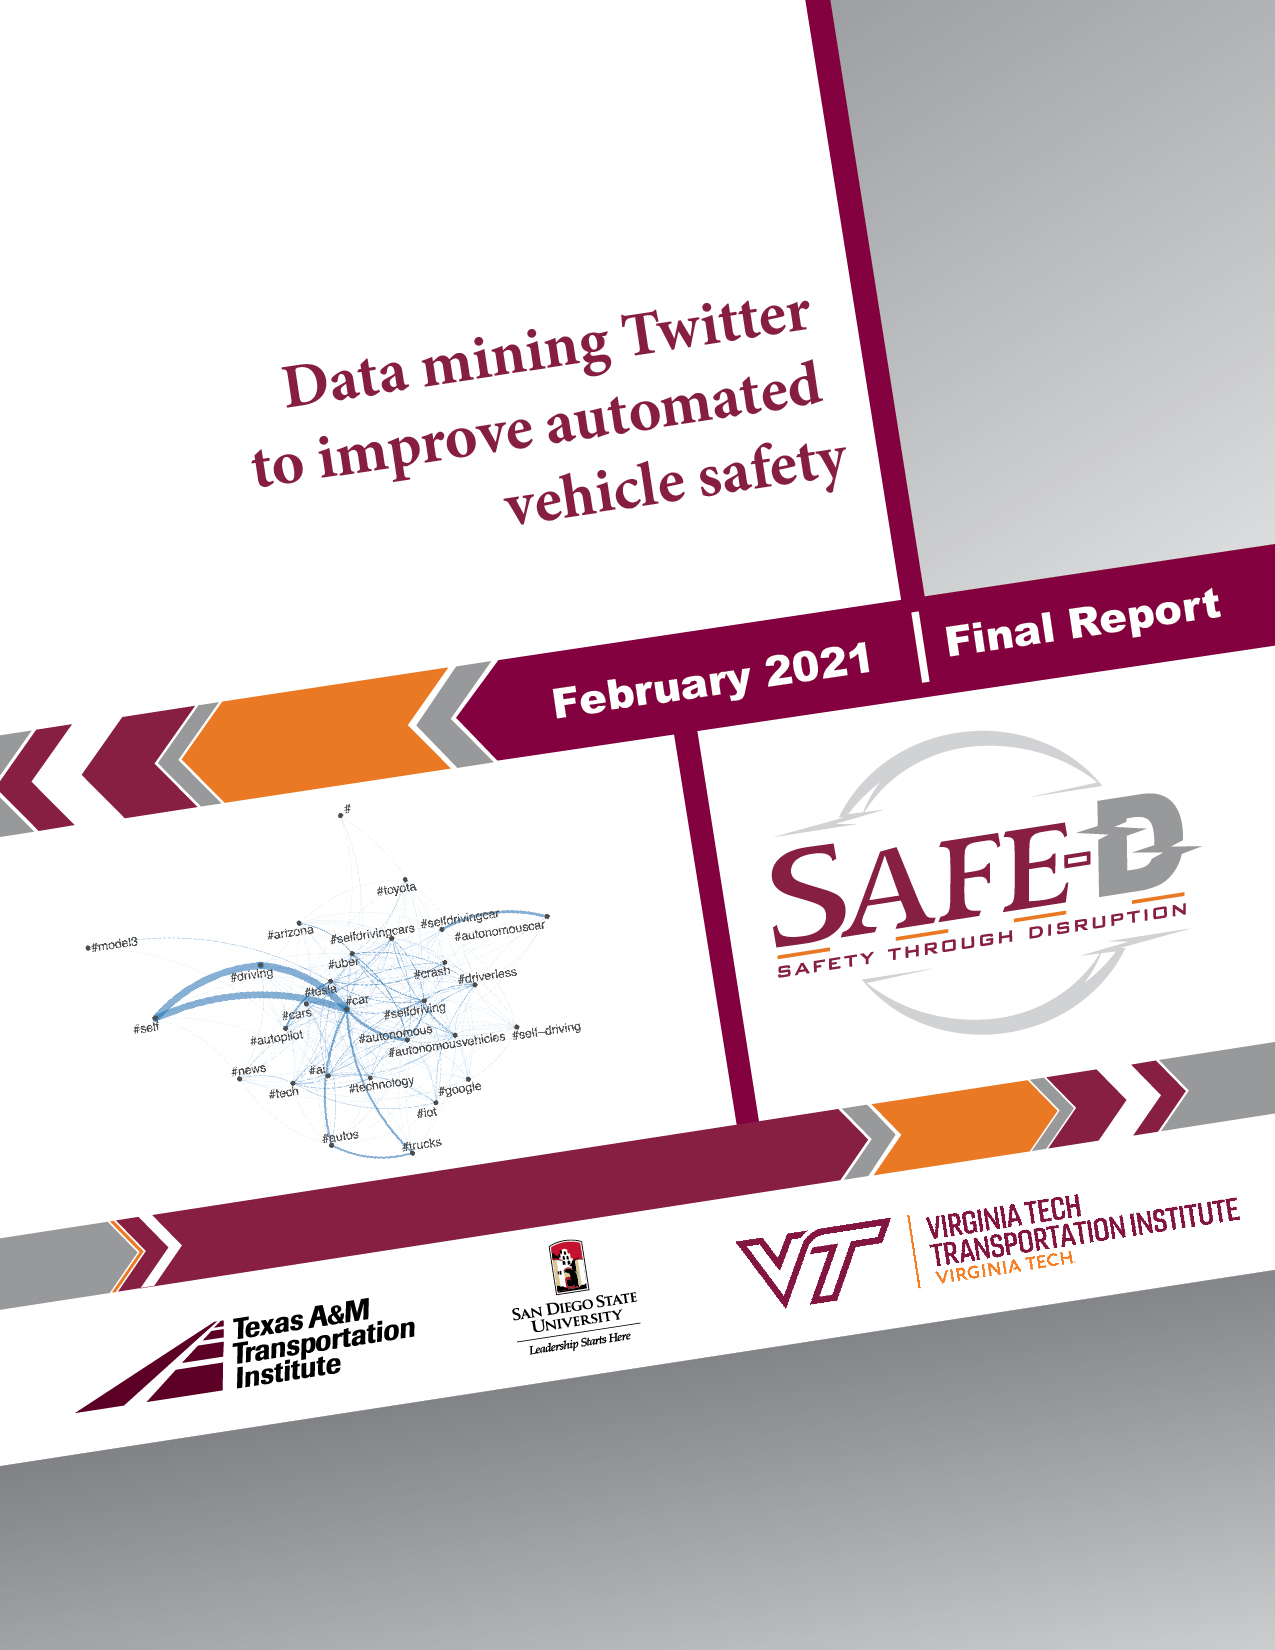 04-098 Data Mining Twitter to Improve Automated Vehicle Safety